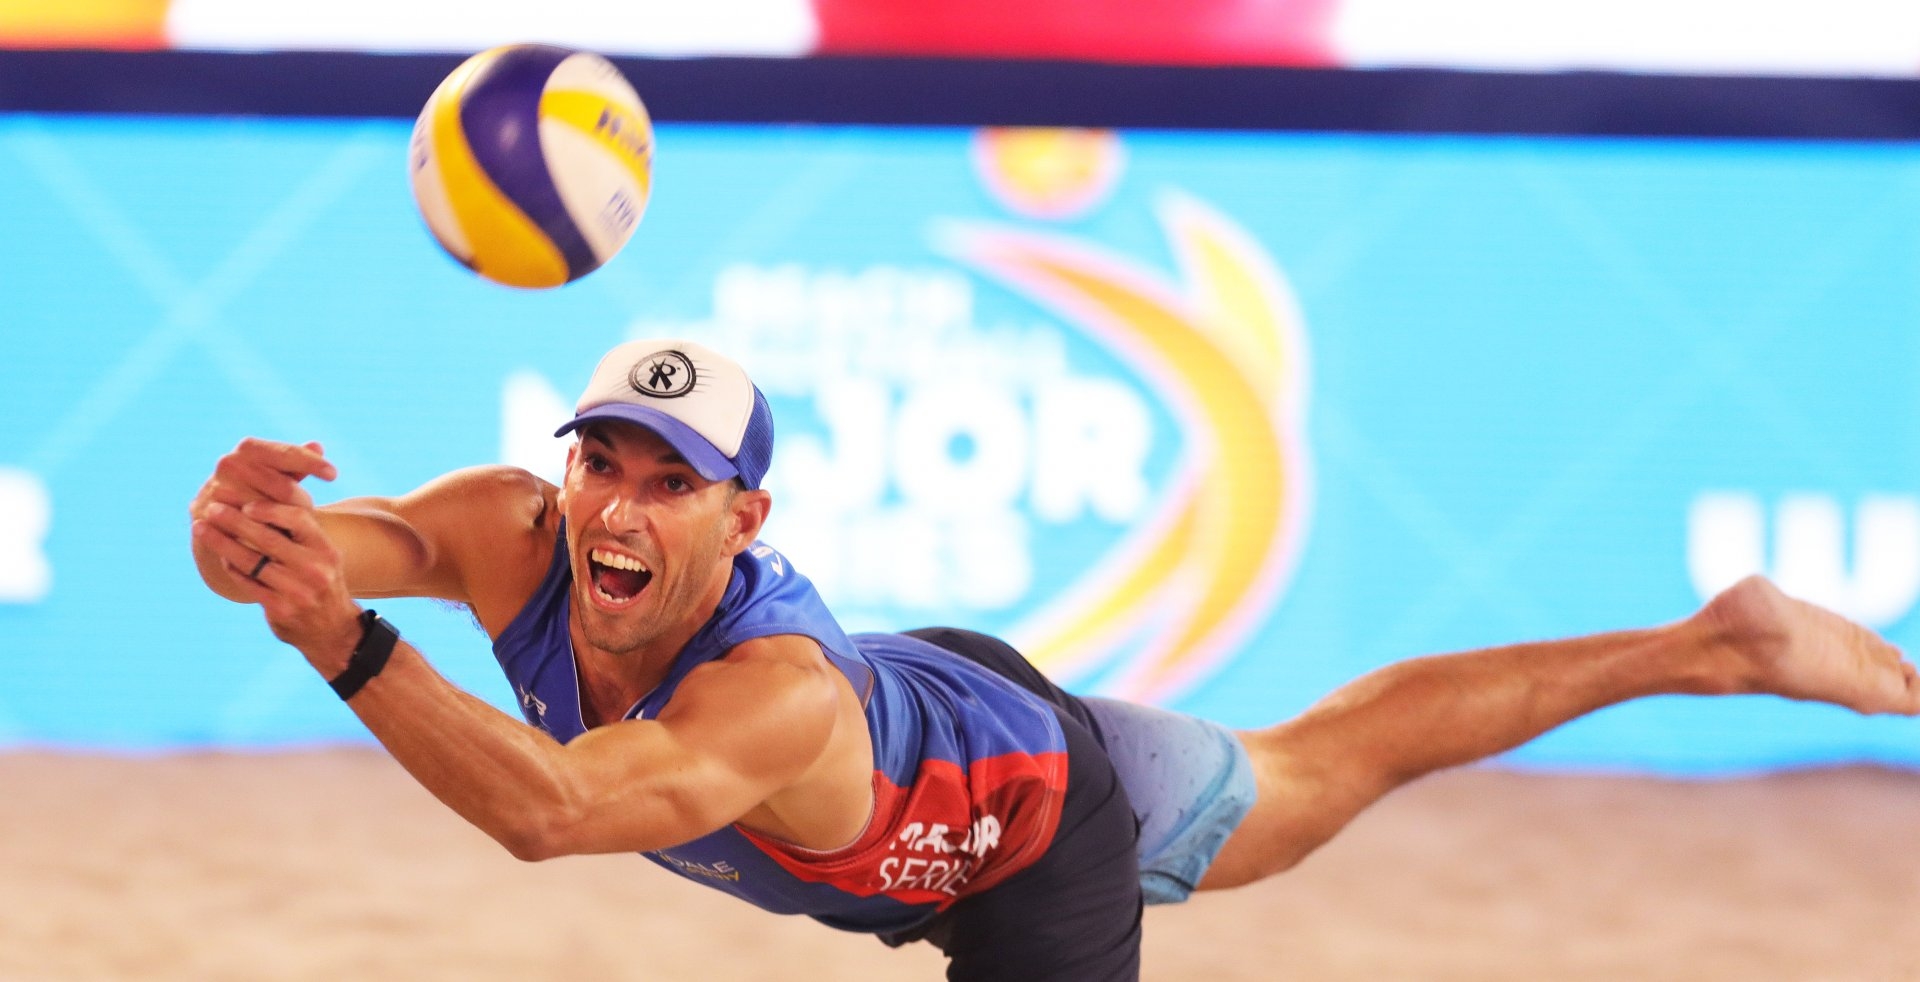 Nick Lucena dives to dig the ball (Photocredit: FIVB)